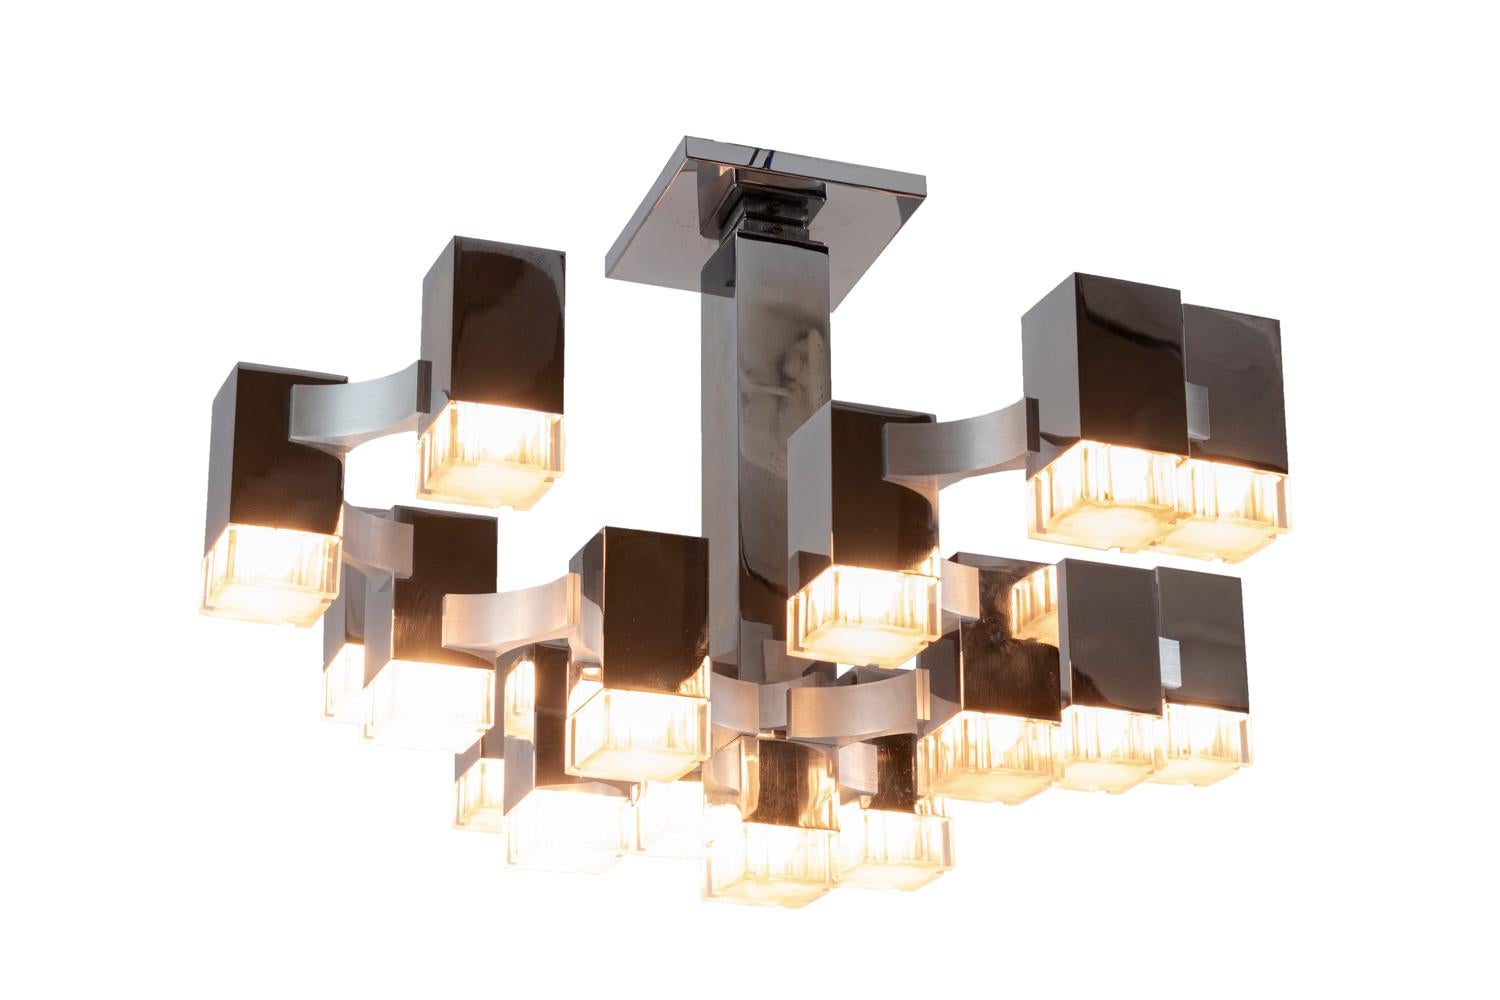 Gaetano Sciolari, attributed to.
Chandelier Cubic model with square section in chrome brushed steel with 37 light covered with Lucite cubes, displayed all around the central shaft in a geometric way.

Model design in the 1960-1970 and produced in